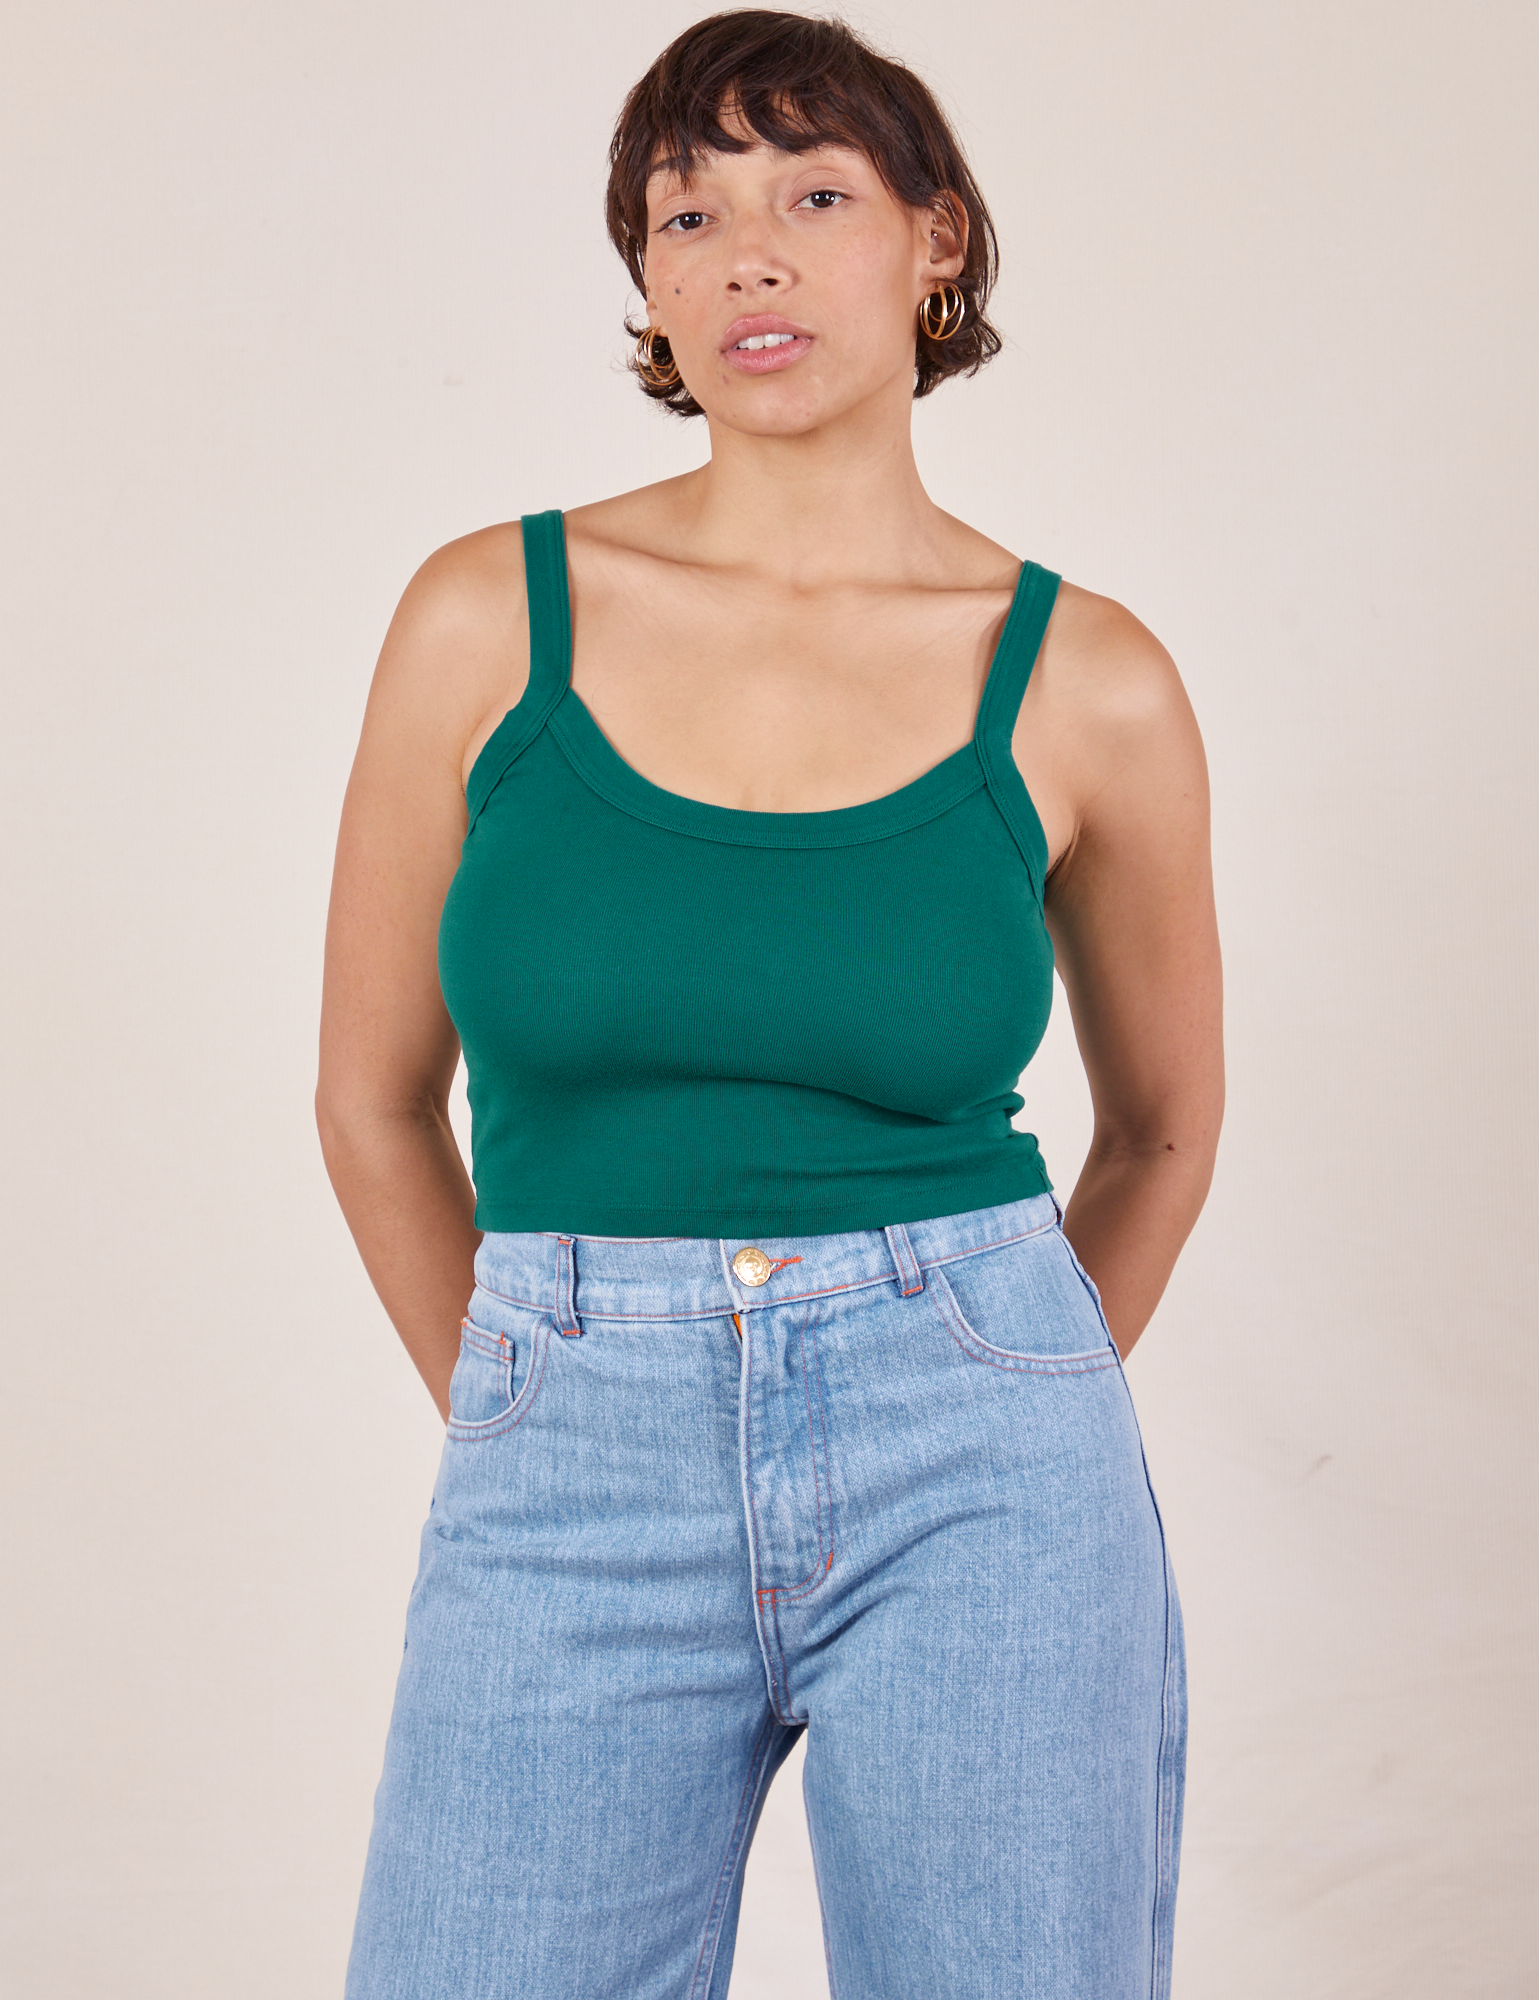 Tiara is 5&#39;4&quot; and wearing XS Cropped Cami in Hunter Green paired with light wash Frontier Jeans